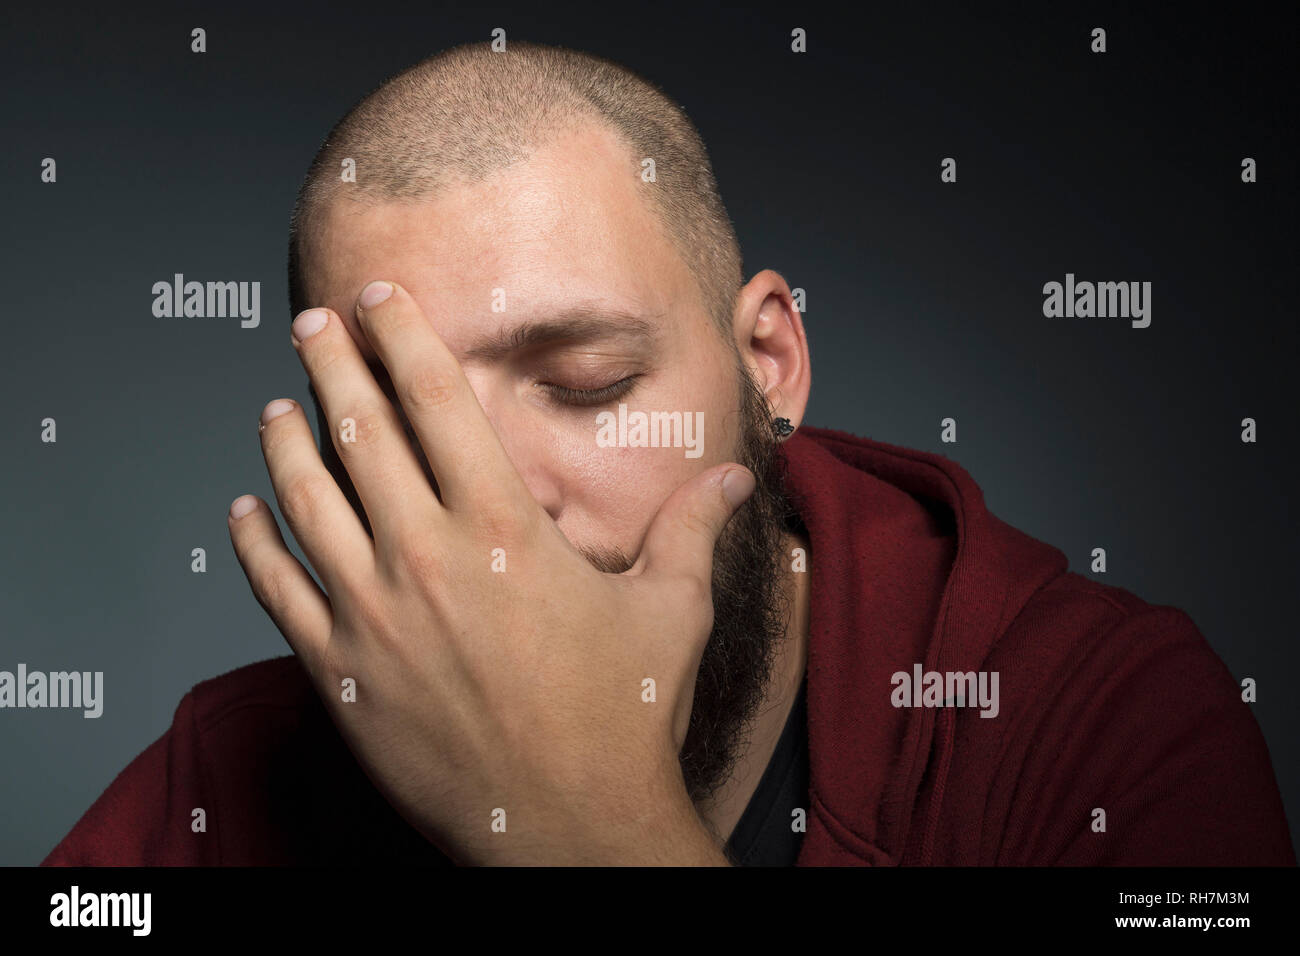 Man with eyes closed covering face with hands Stock Photo